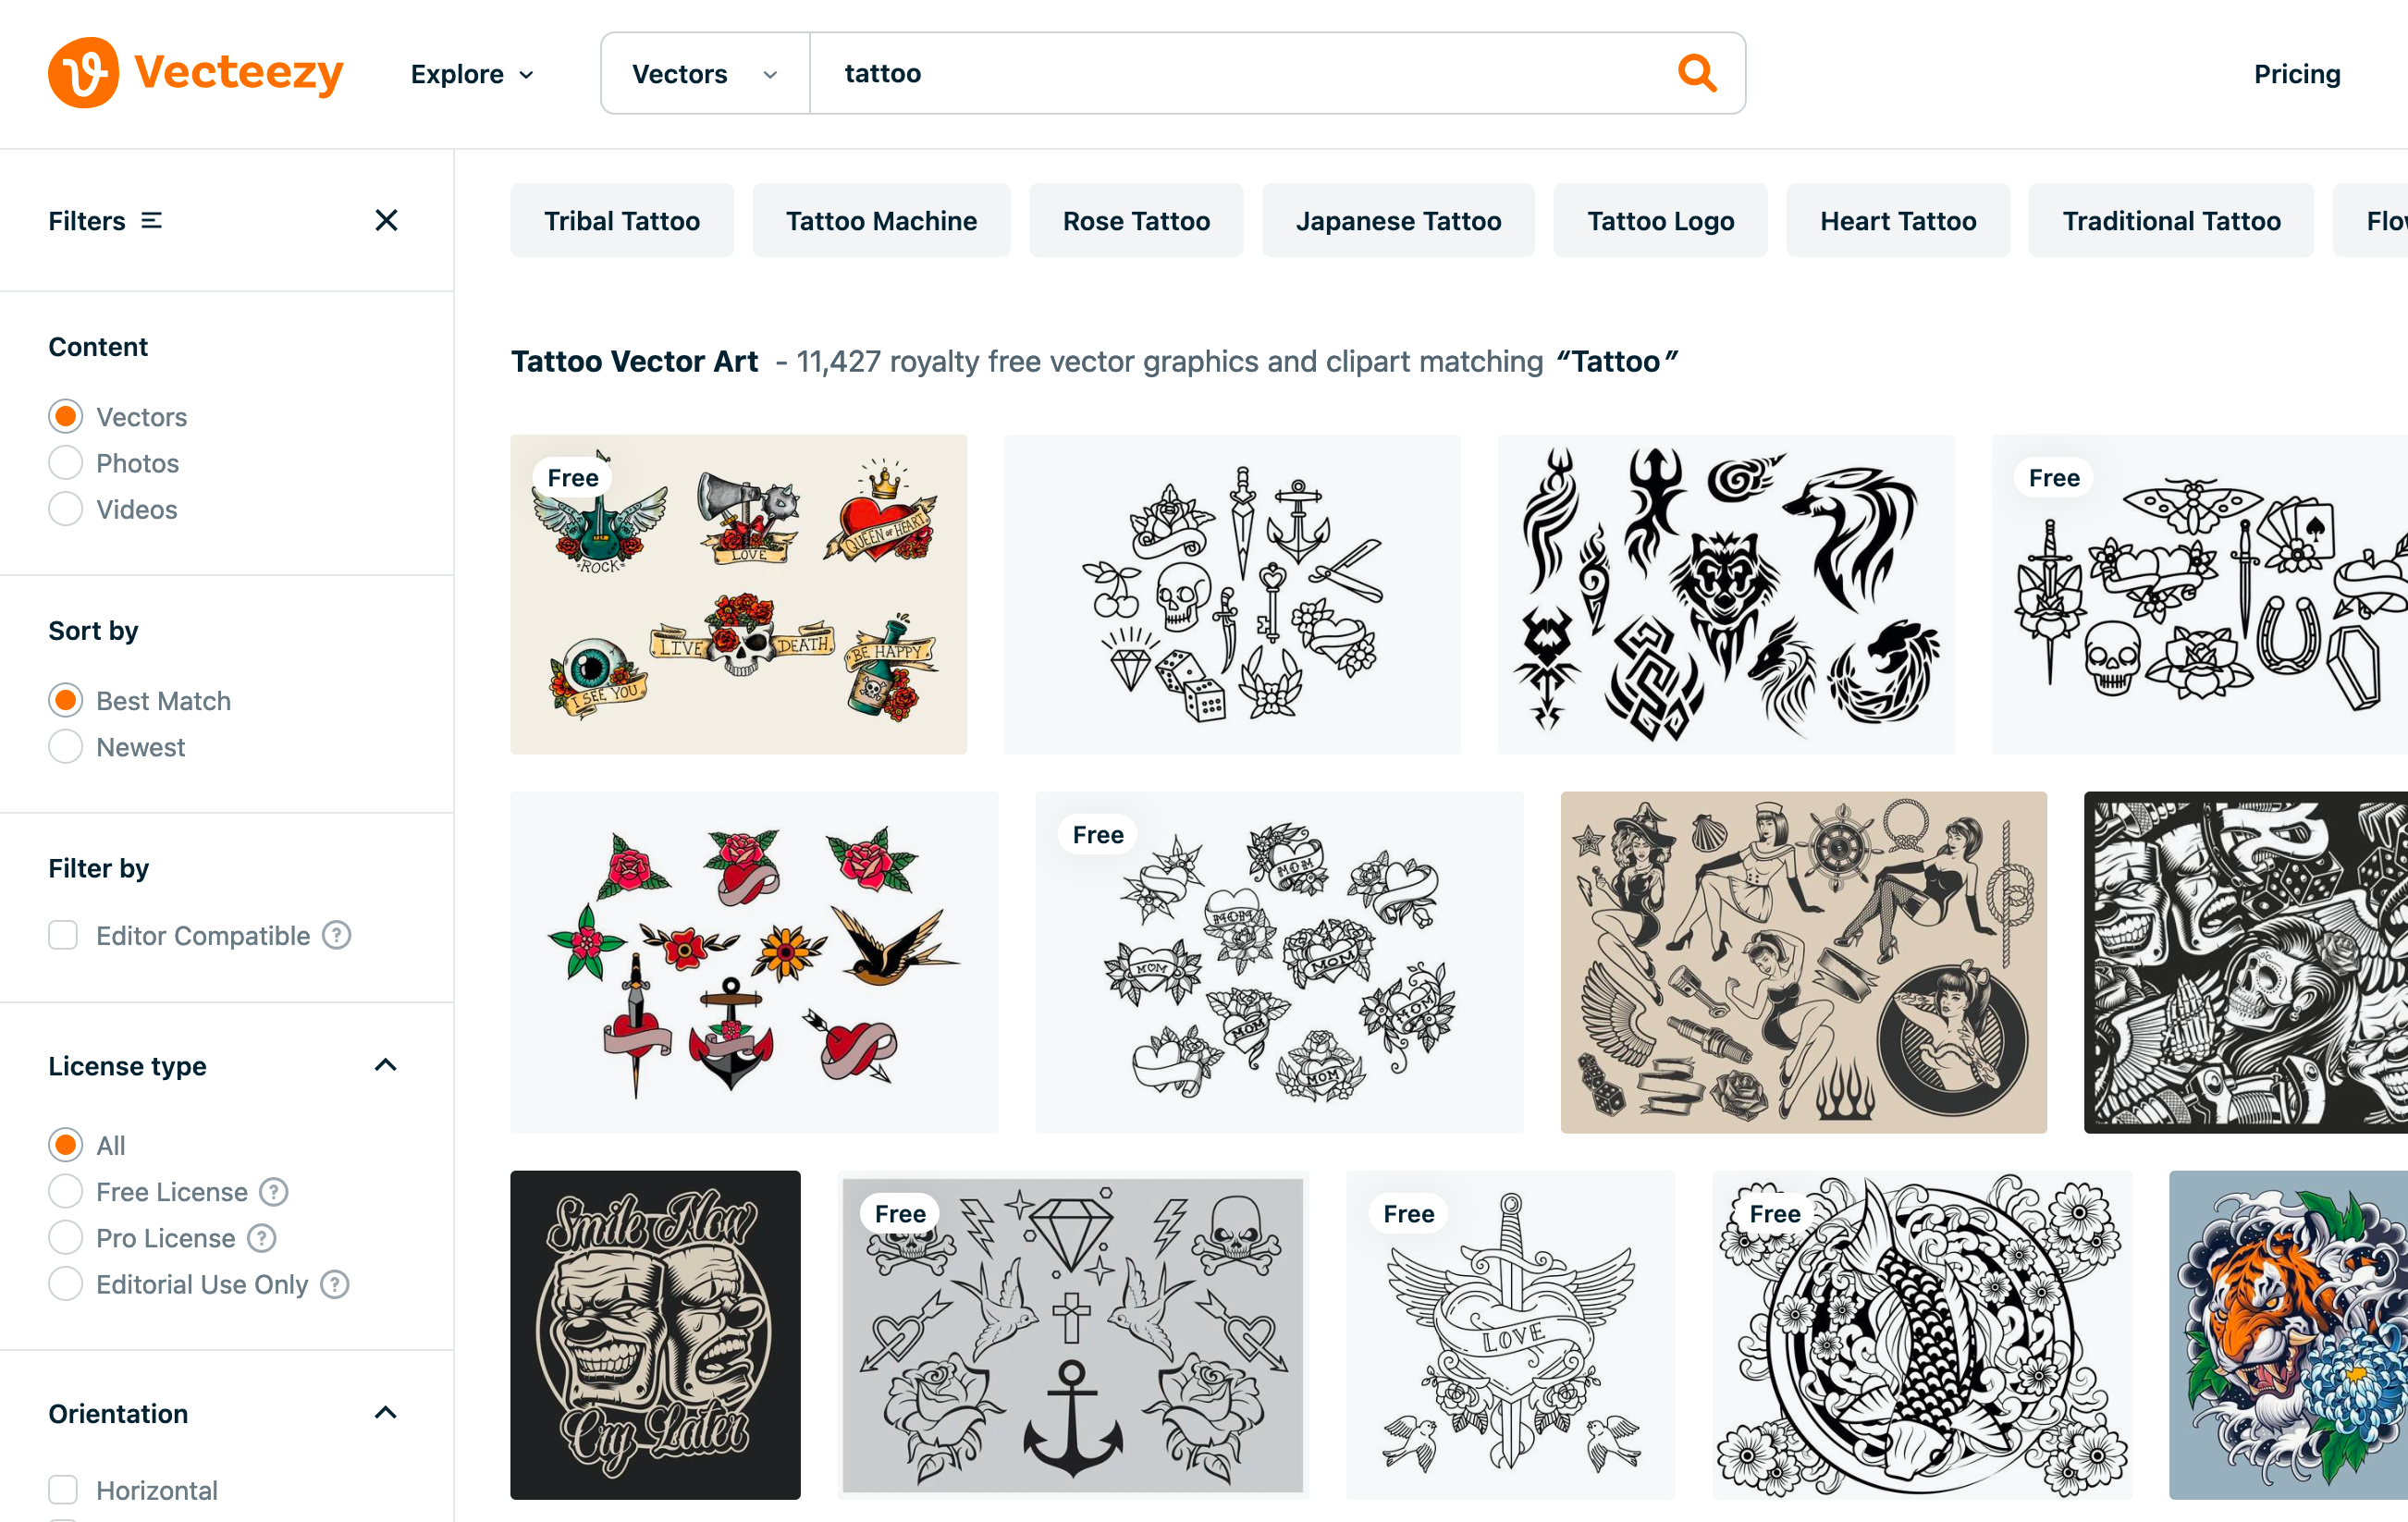 313 Tattoo Motto Images, Stock Photos, 3D objects, & Vectors | Shutterstock